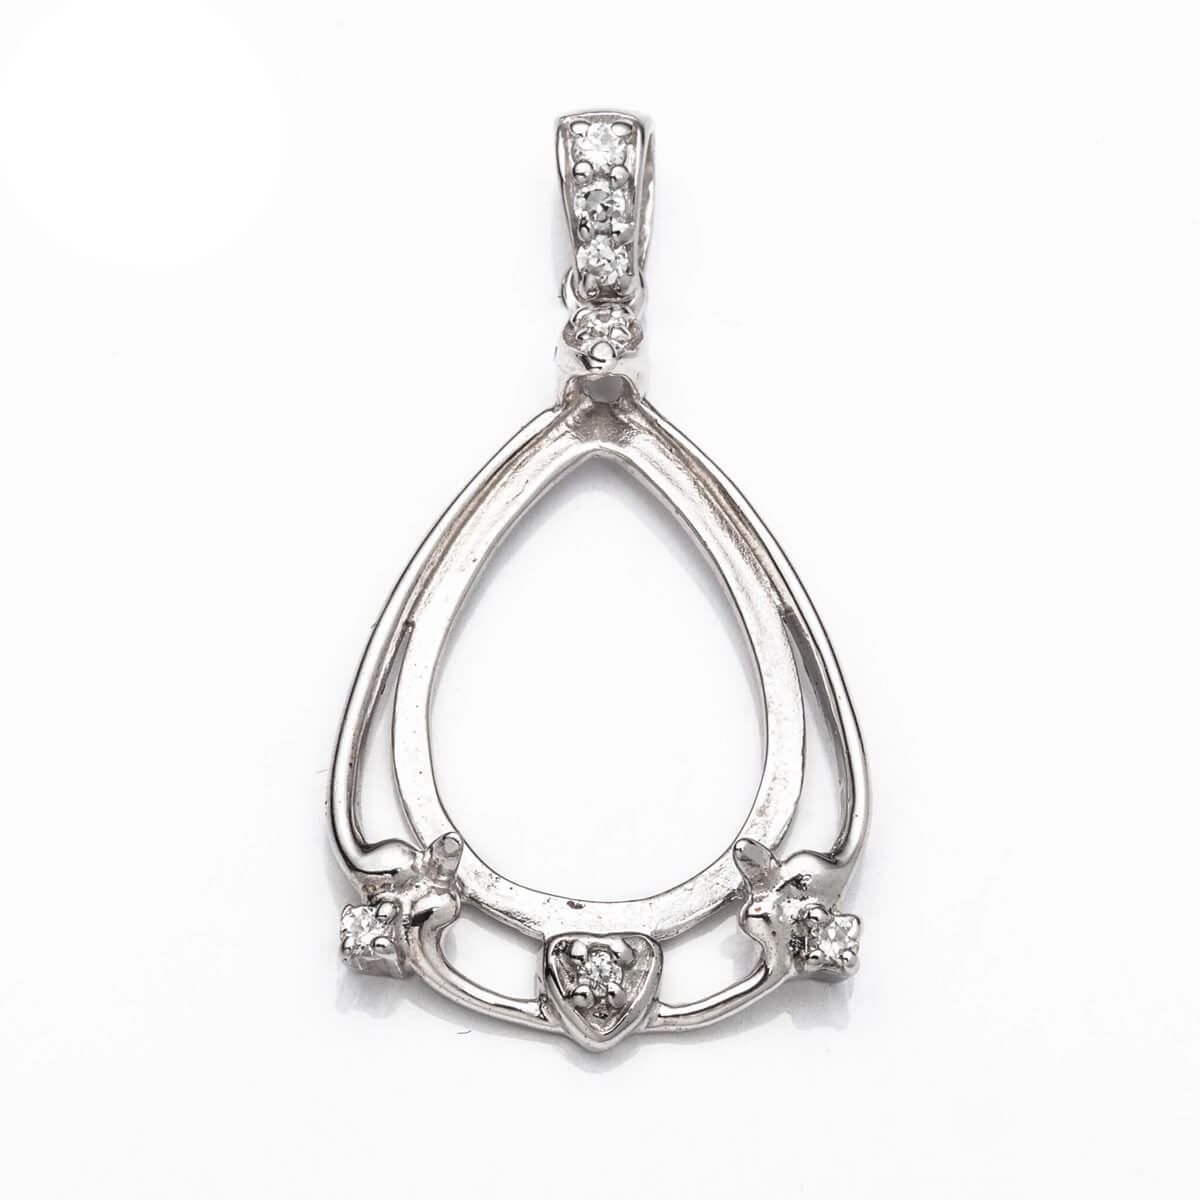 Pear Pendant with Cubic Zirconia Inlays and Pear Shape Mounting and Bail in Sterling Silver 13x18mm 